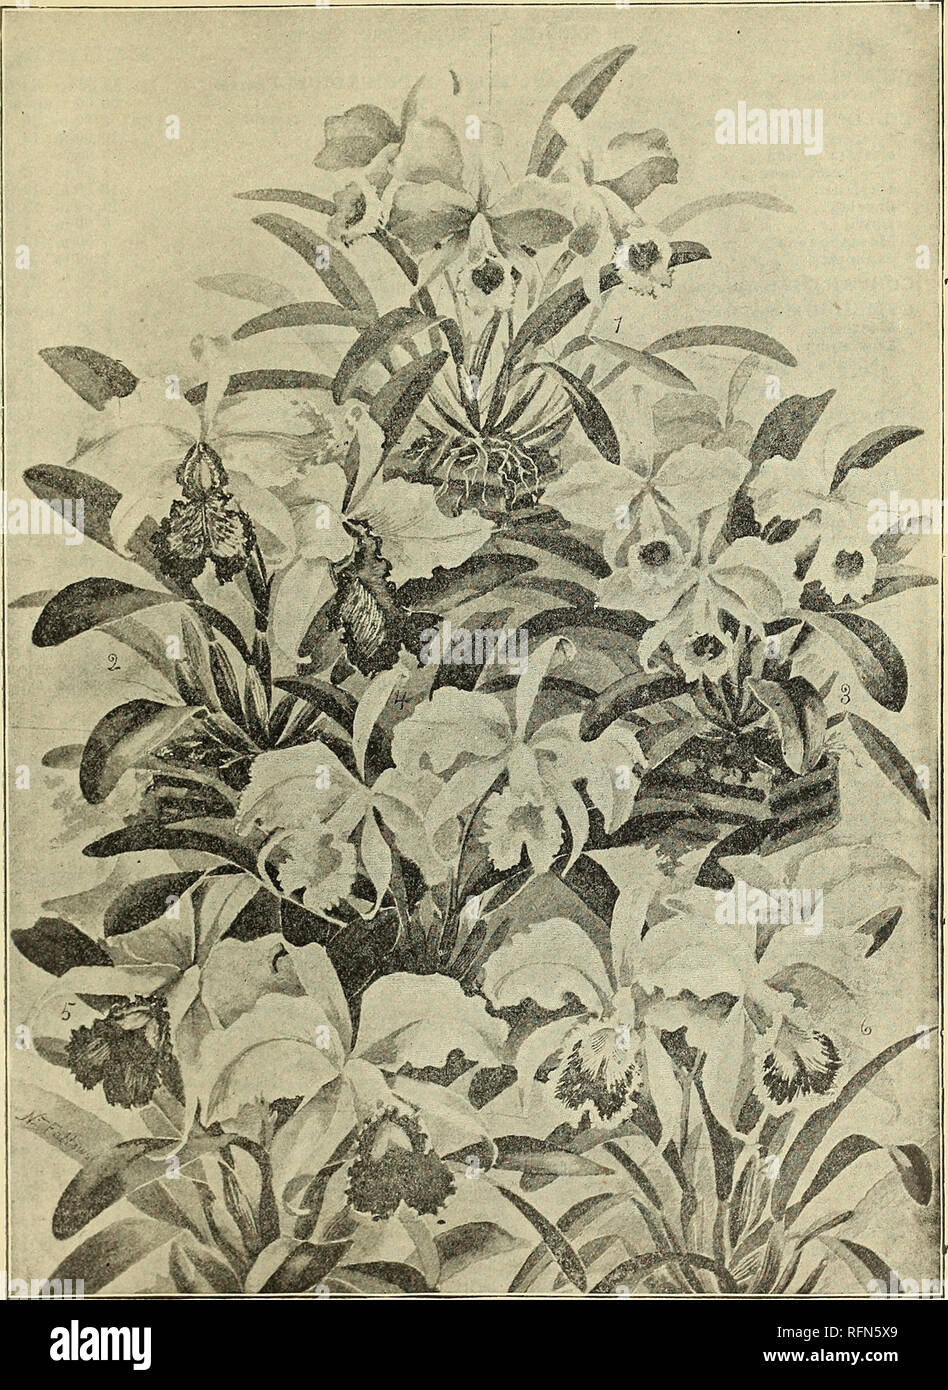 . New rare and beautiful plants. Nurseries (Horticulture) New York (State) New Rochelle Catalogs; Plants, Ornamental Catalogs; Bulbs (Plants) Catalogs; Flowers Catalogs; Trees Seedlings Catalogs. GROTJ f OF CATTLEYAS. (1) C'attleya Percivaliana. (2) Cattleya Dowiana aurea. (3) Cattleya Triana;. (4)ICattleya Triana? delicata. (5) Cattleya gigas. (6) Cattleya Mossicp. 7*Sr These illustrations represent good, fair-sized plants from photographs of plants we offer.. Please note that these images are extracted from scanned page images that may have been digitally enhanced for readability - coloratio Stock Photo